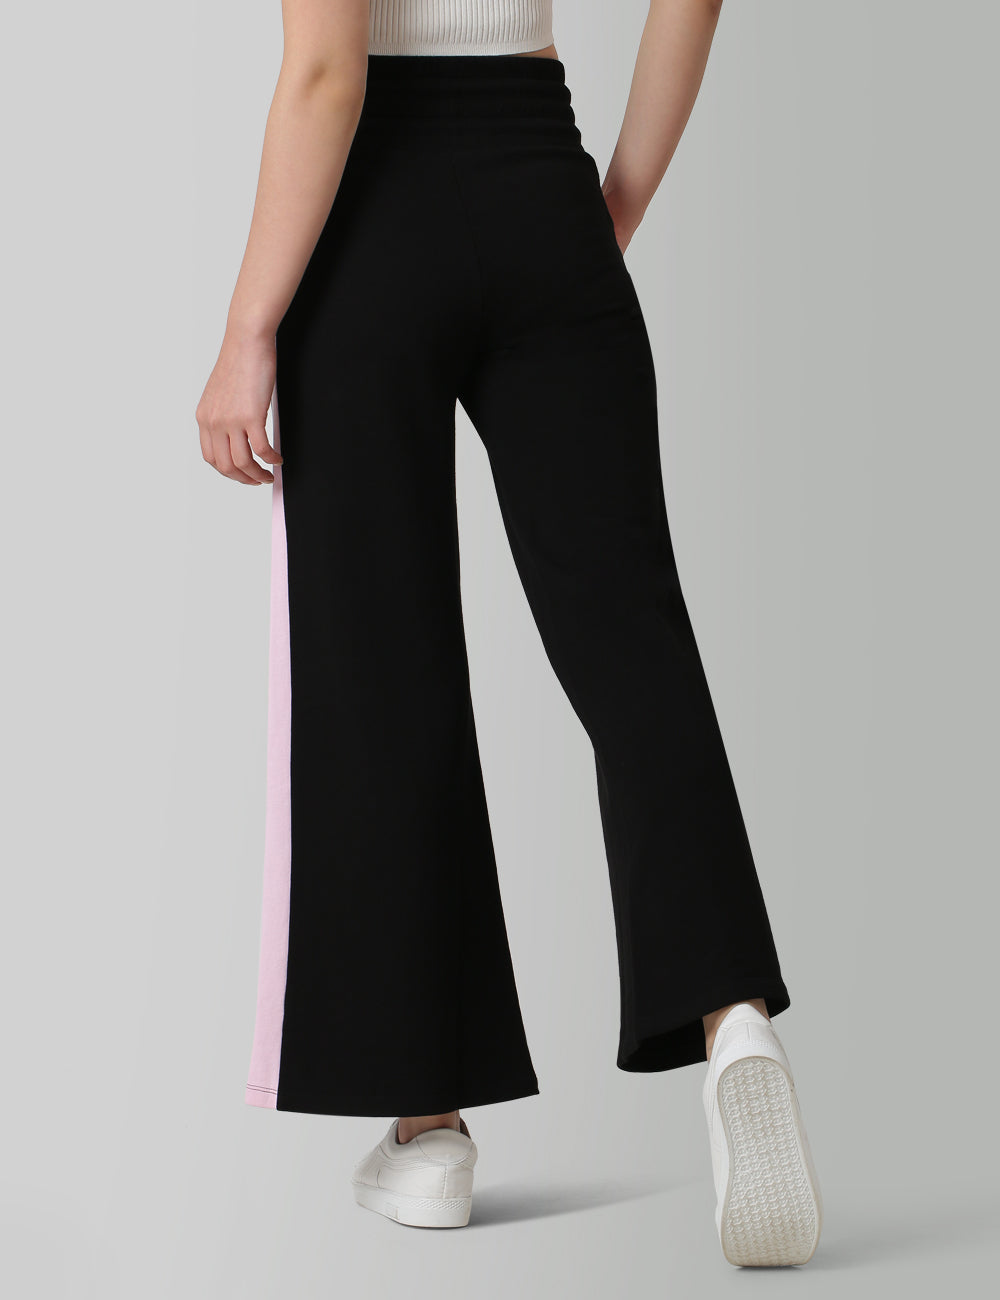 Waist Tie Trousers | Shukr Clothing